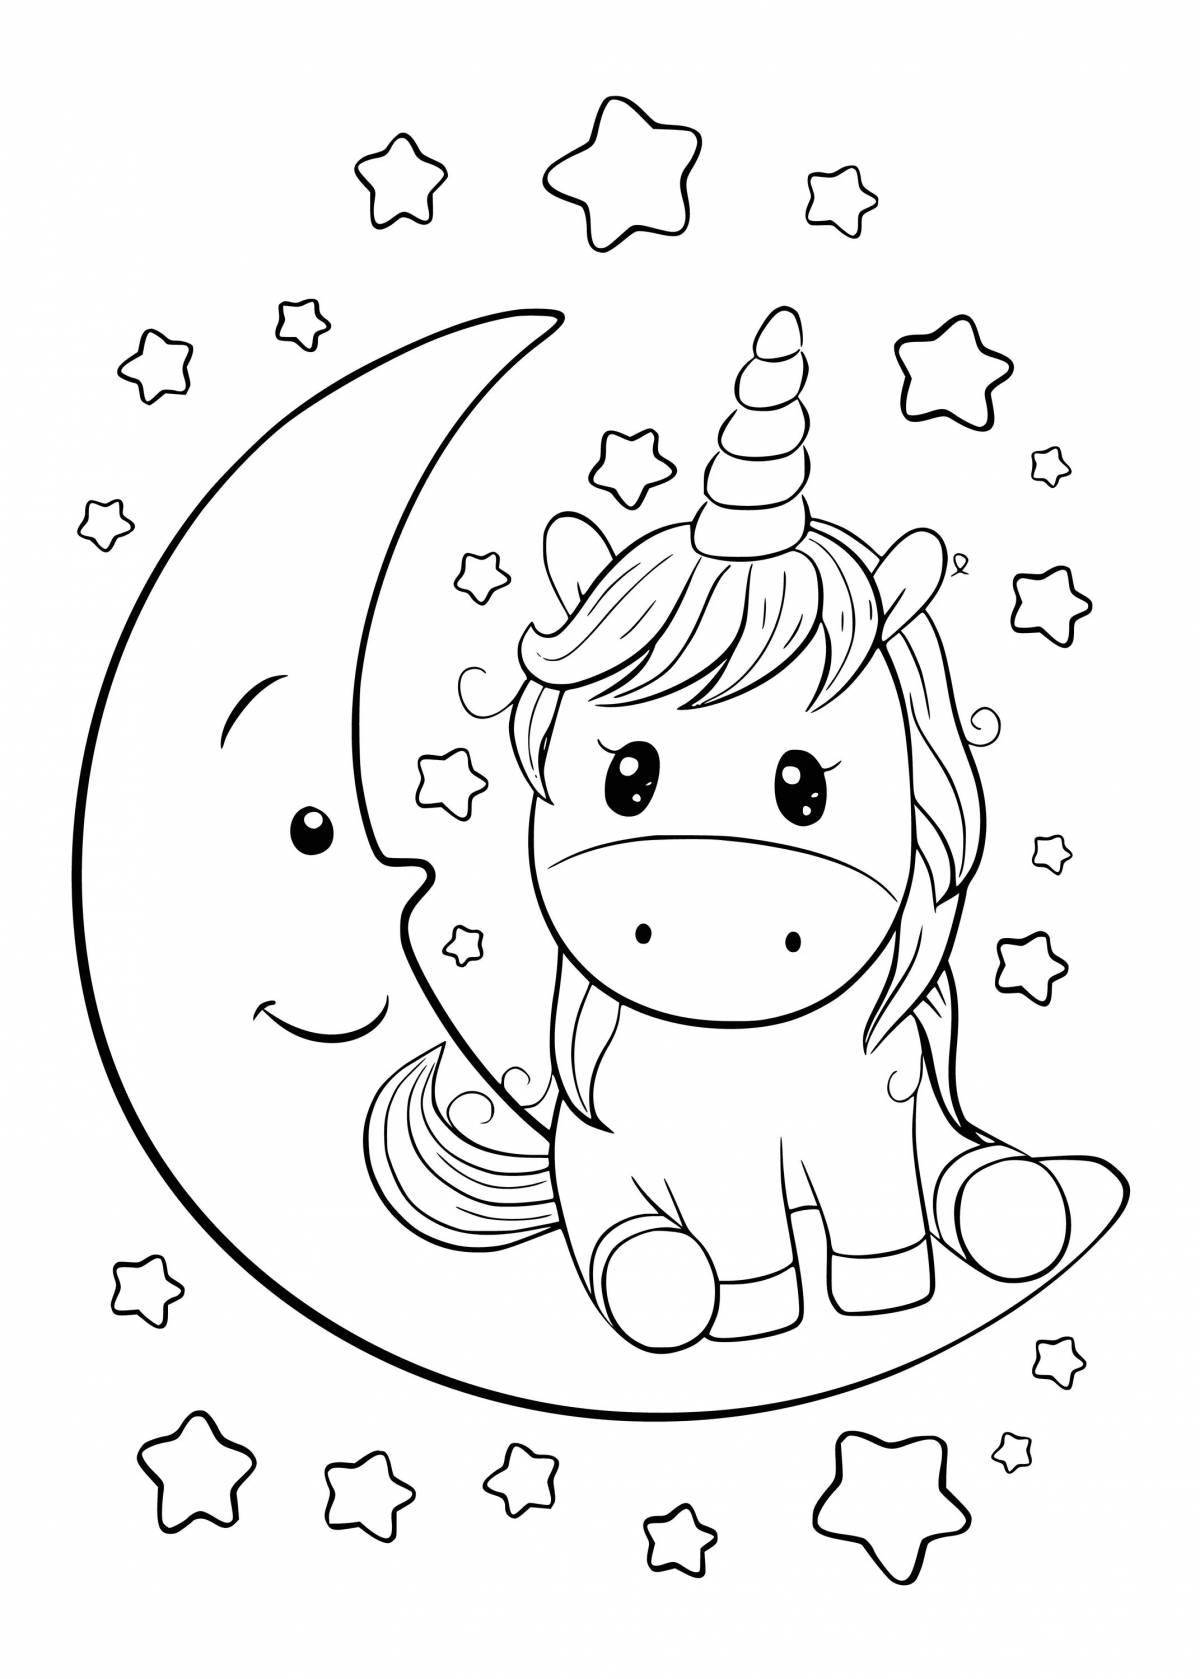 Glamorous unicorn coloring book for kids 5-6 years old